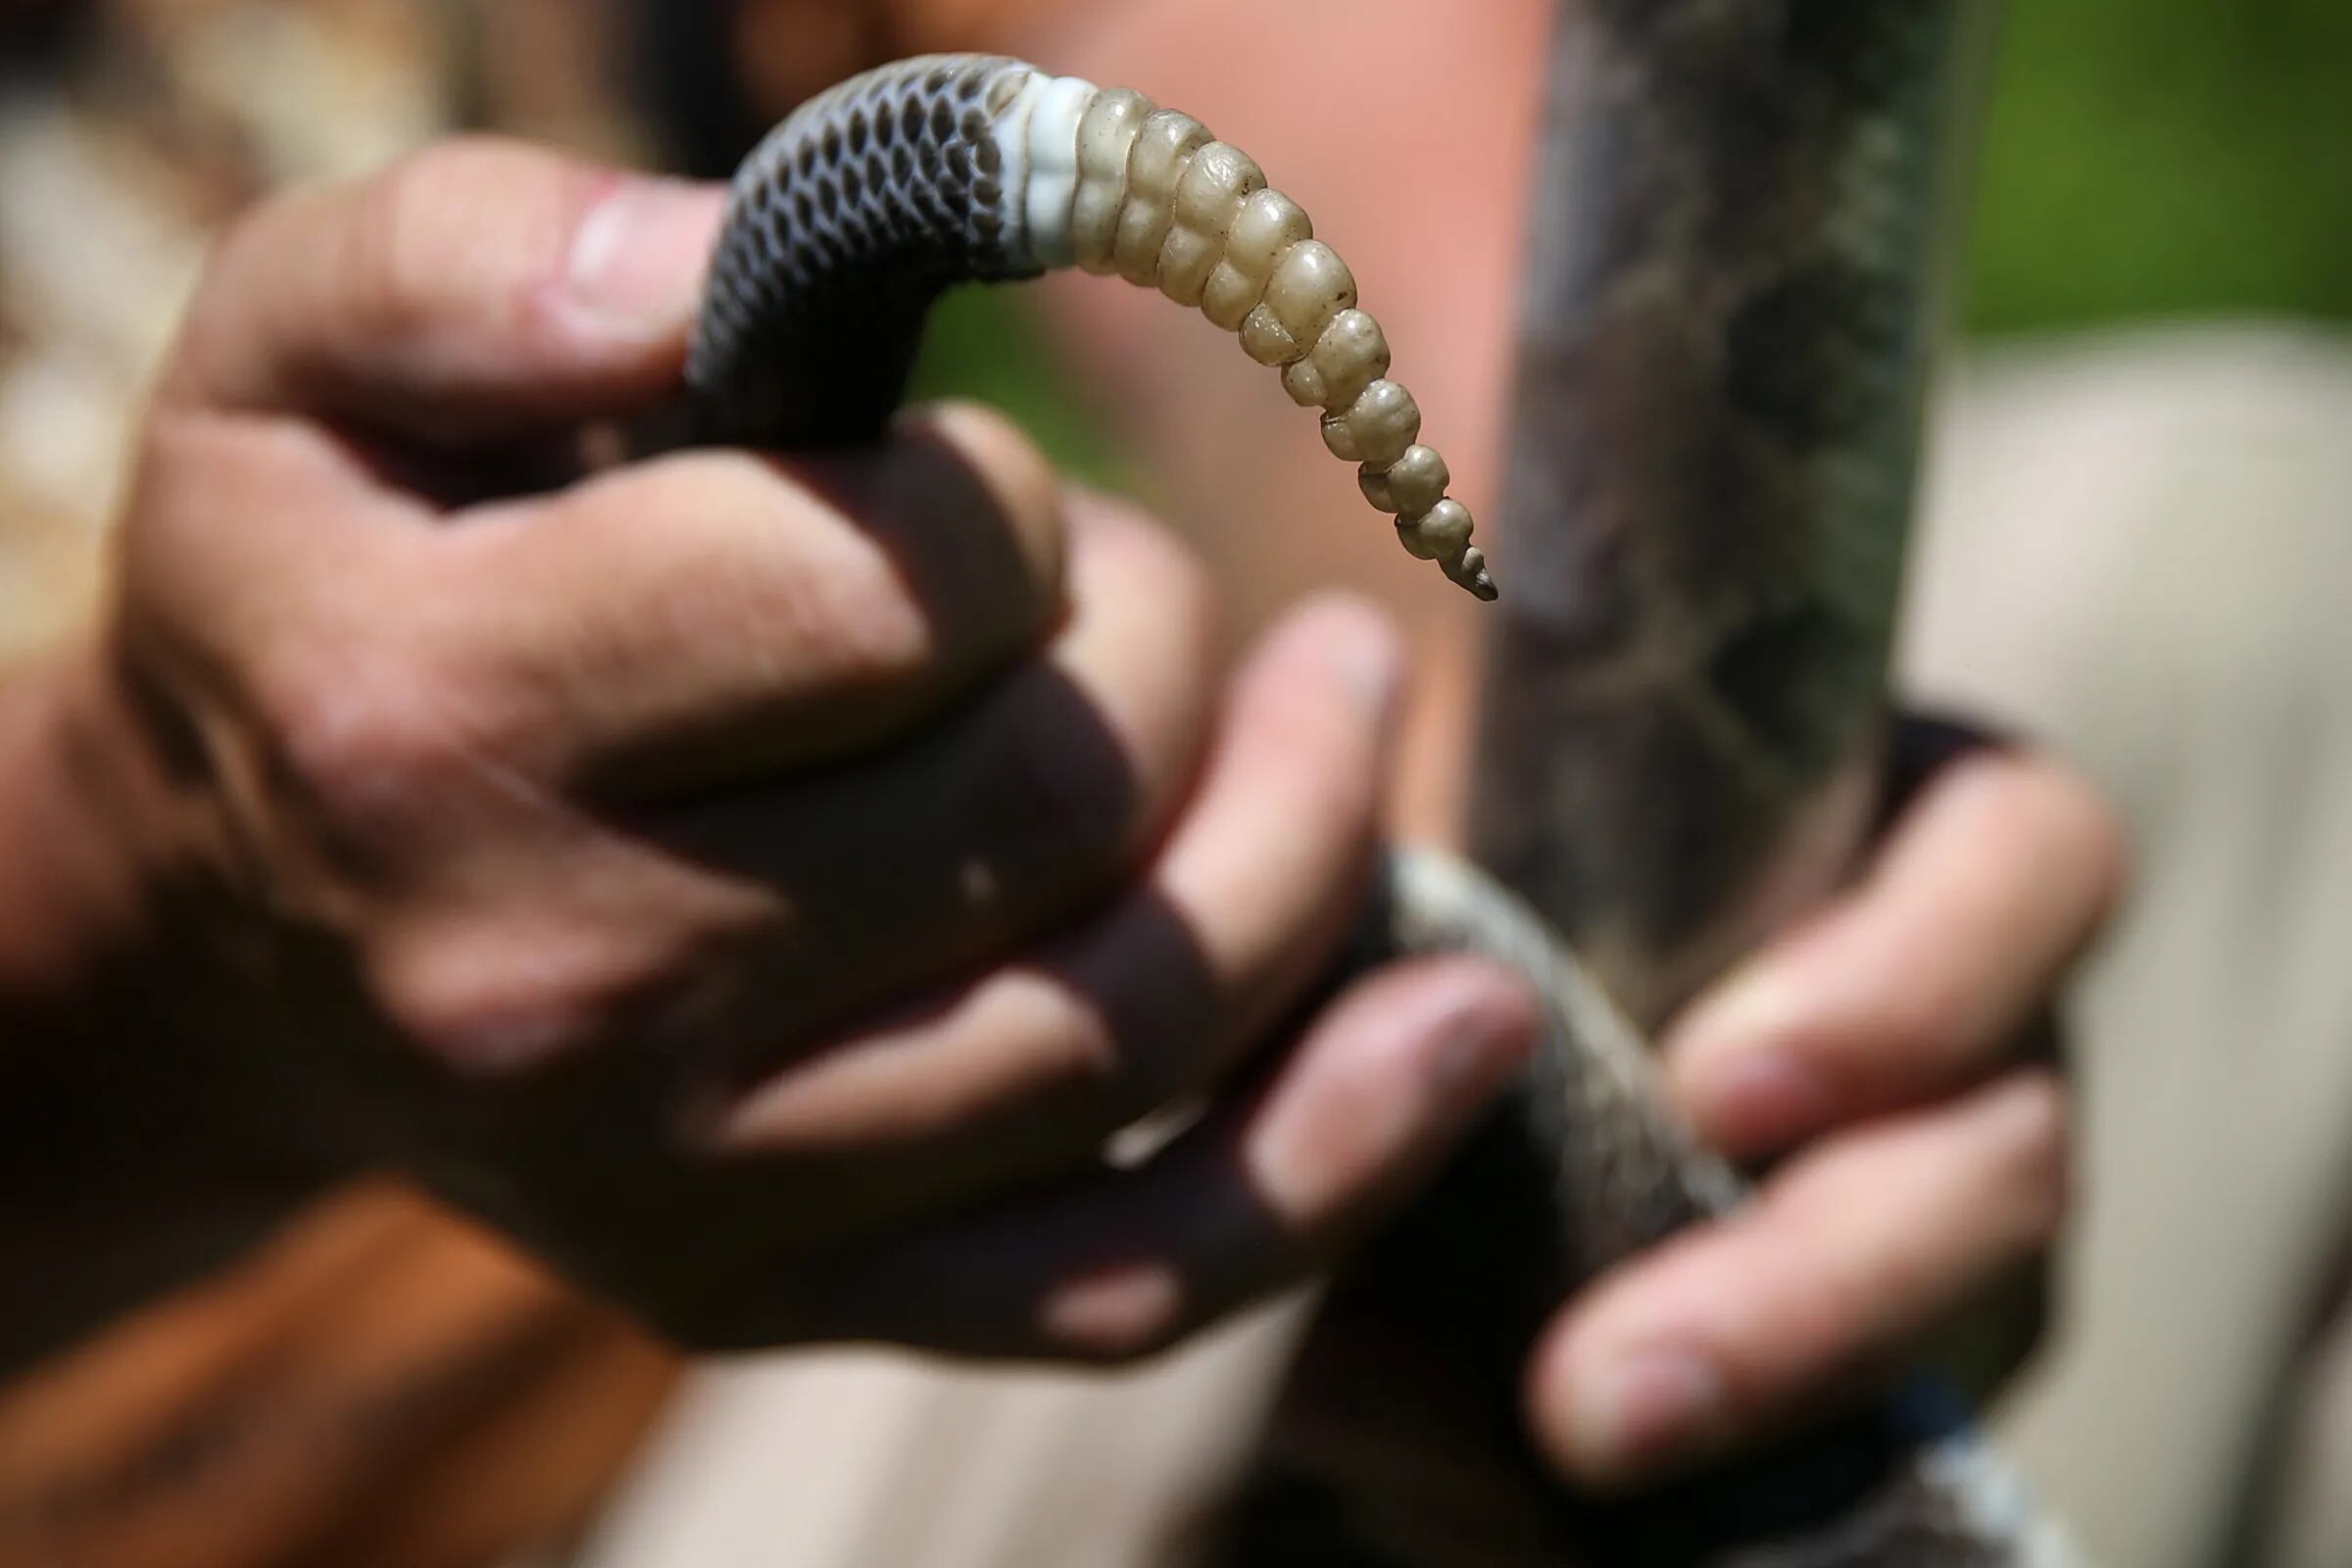 A Rare Two-Headed Snake Is Back on Exhibit at a Texas Zoo, Smart News